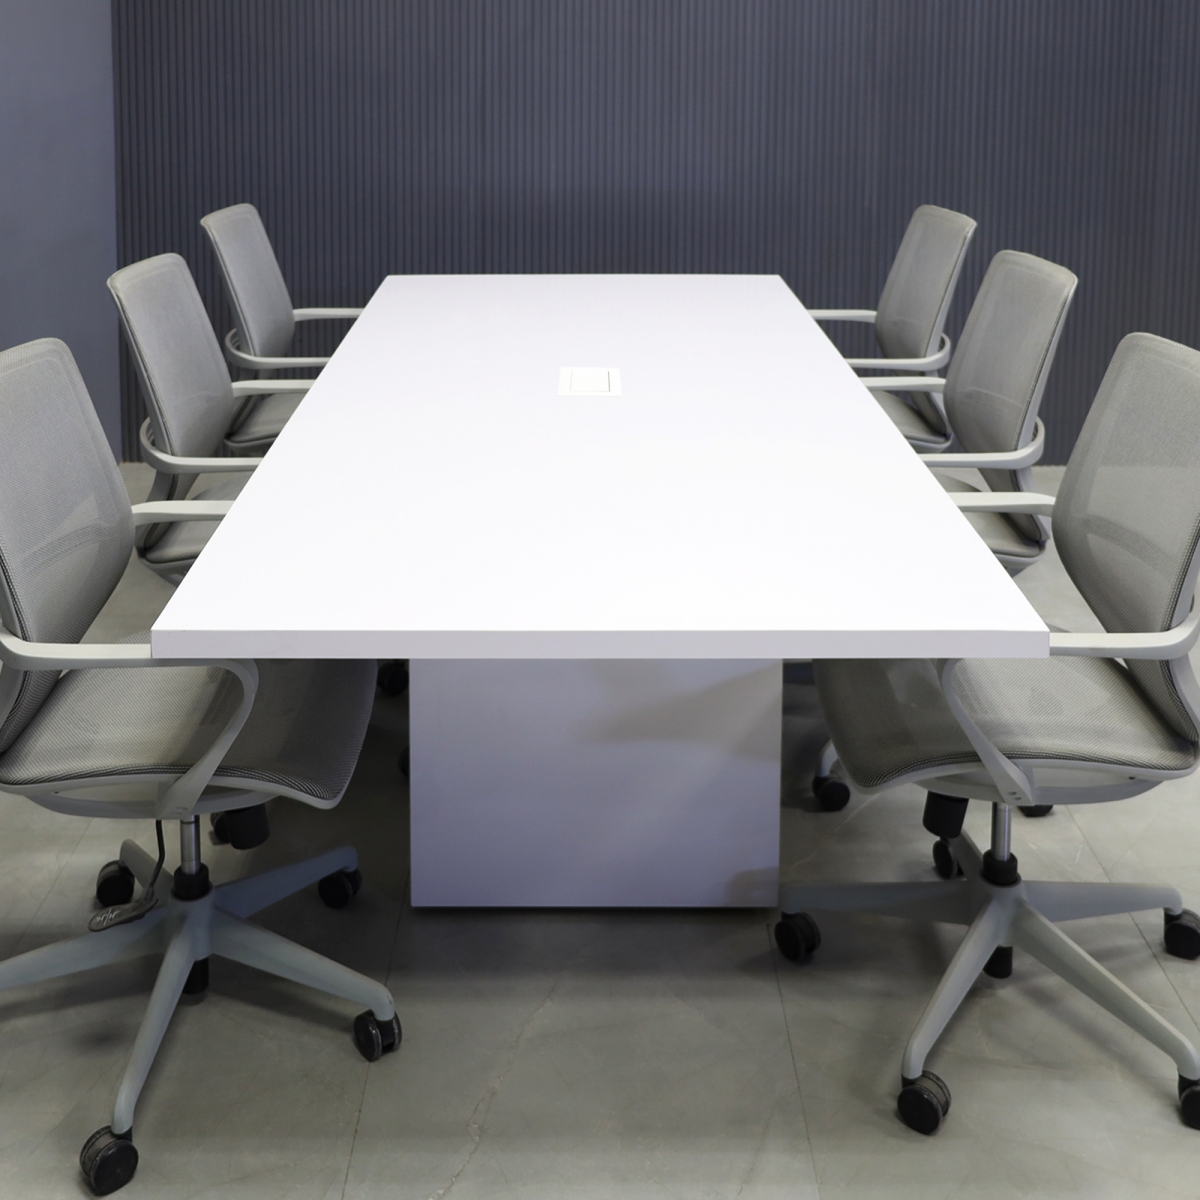 Newton Rectangular Shape Conference Table in White Gloss Laminate - 90 In. - Stock #44